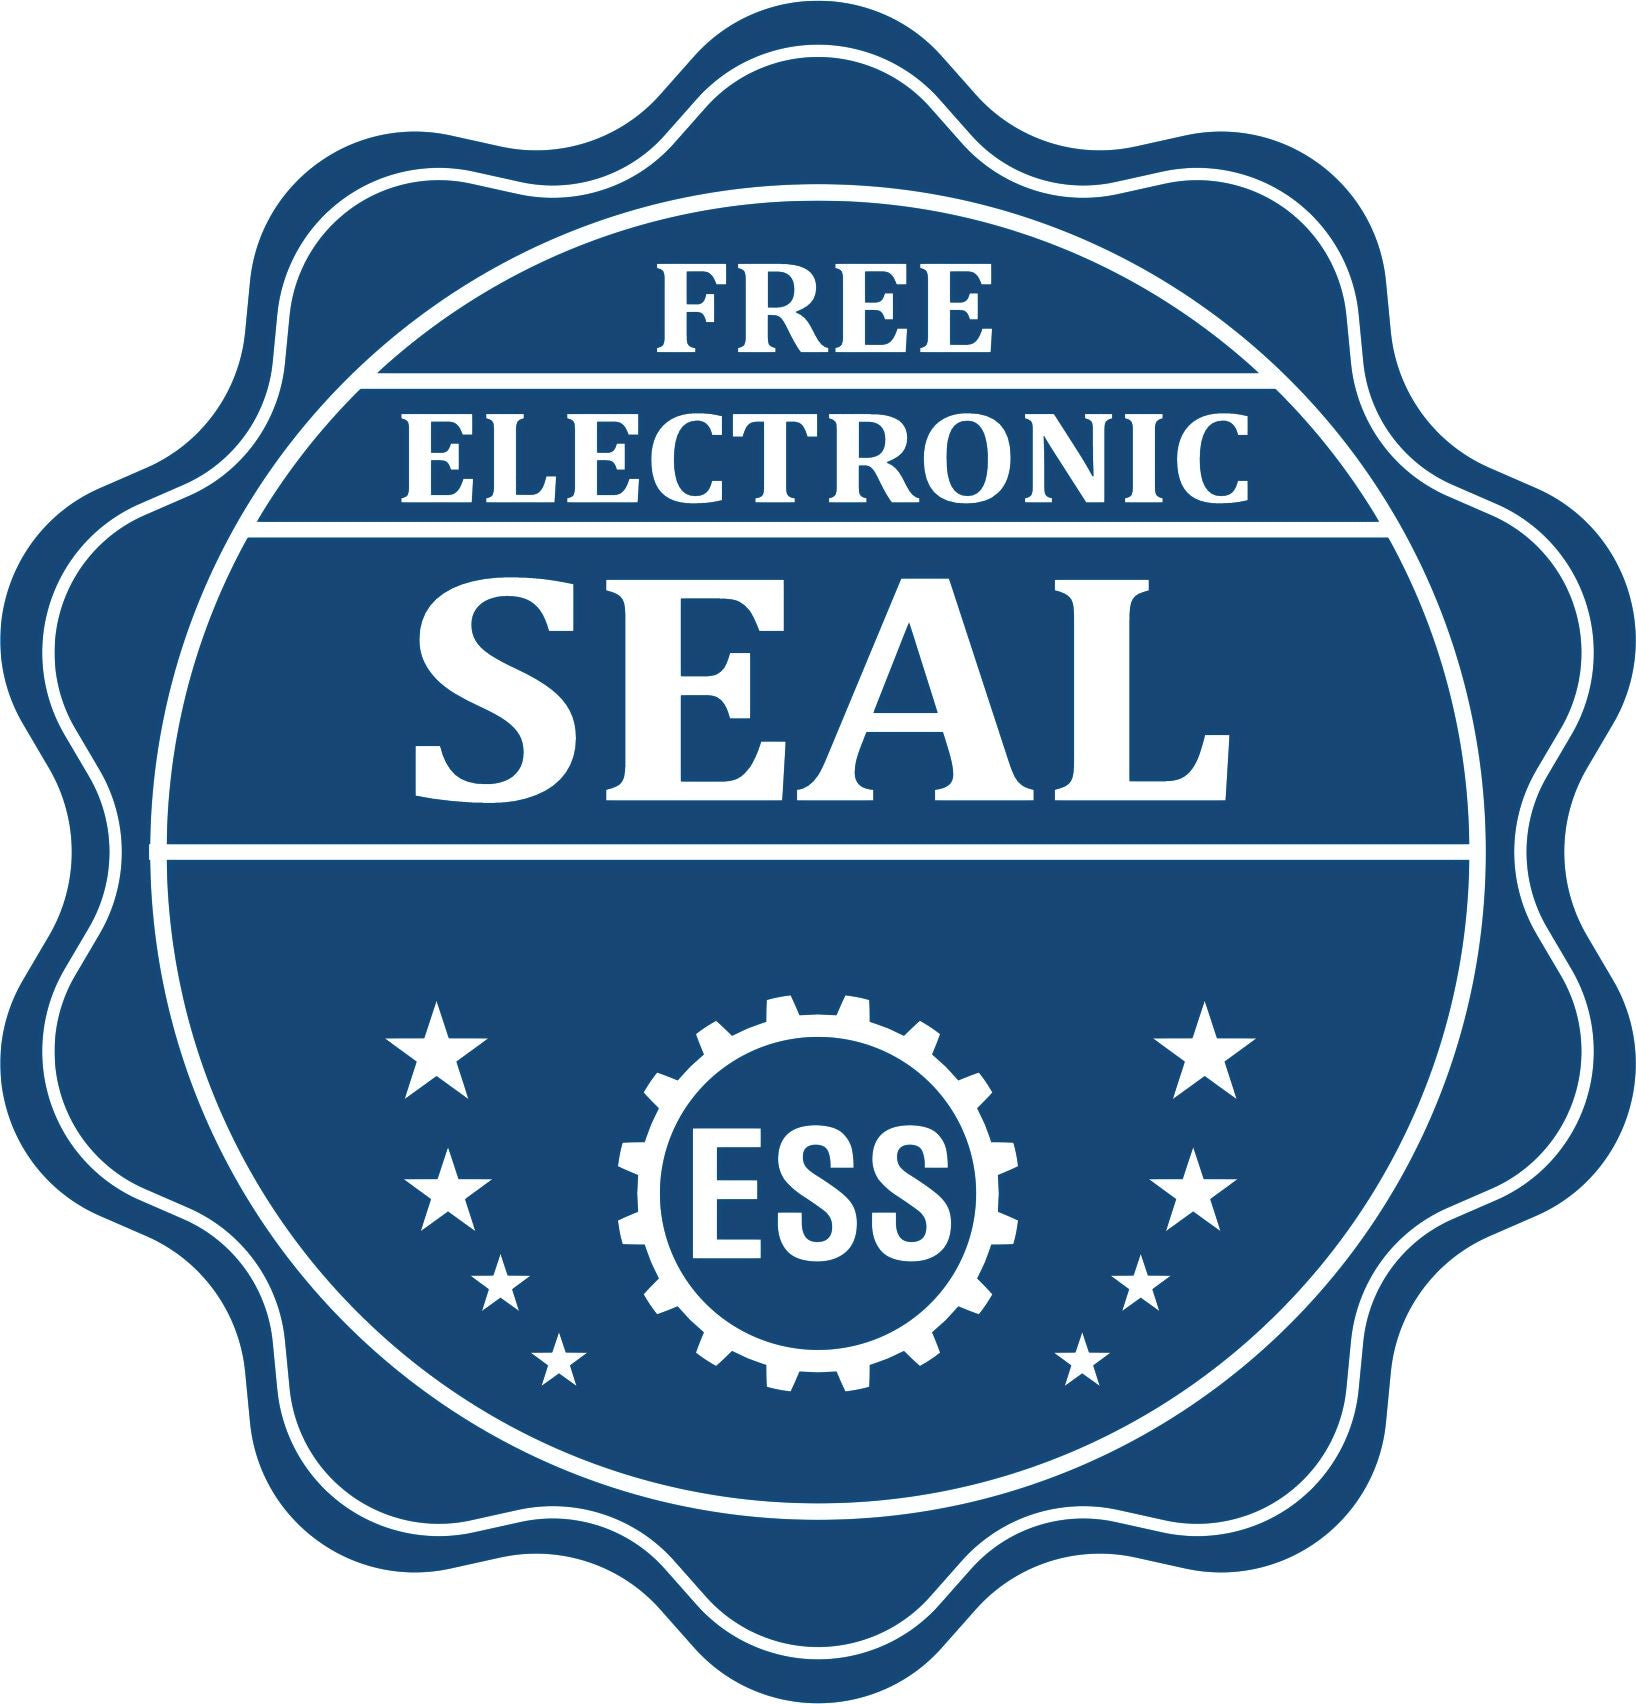 A badge showing a free electronic seal for the Handheld Florida Professional Geologist Embosser with stars and the ESS gear on the emblem.